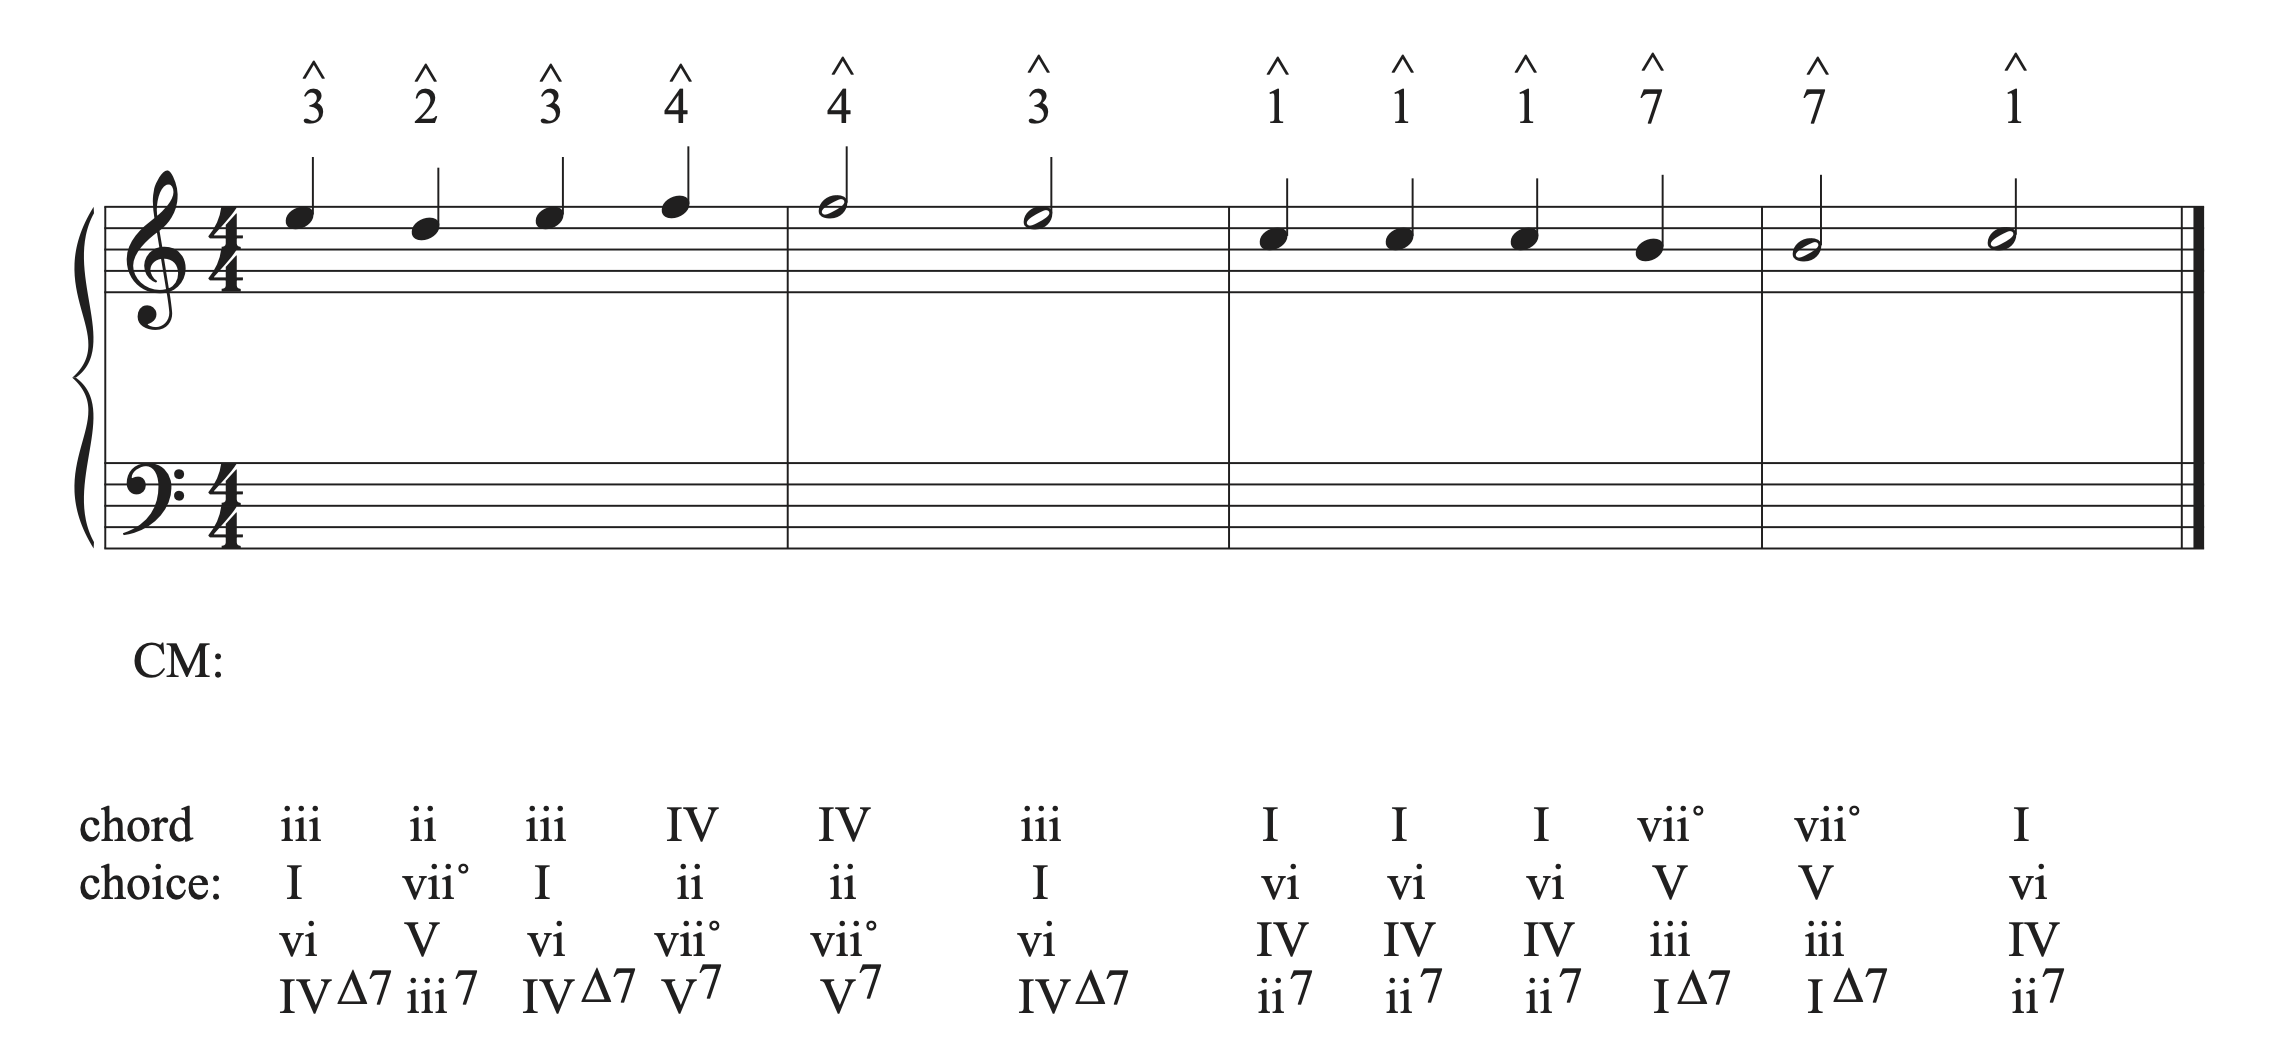 The musical example in C major with scale degrees added and a list of chords possible on each scale degree in the soprano.